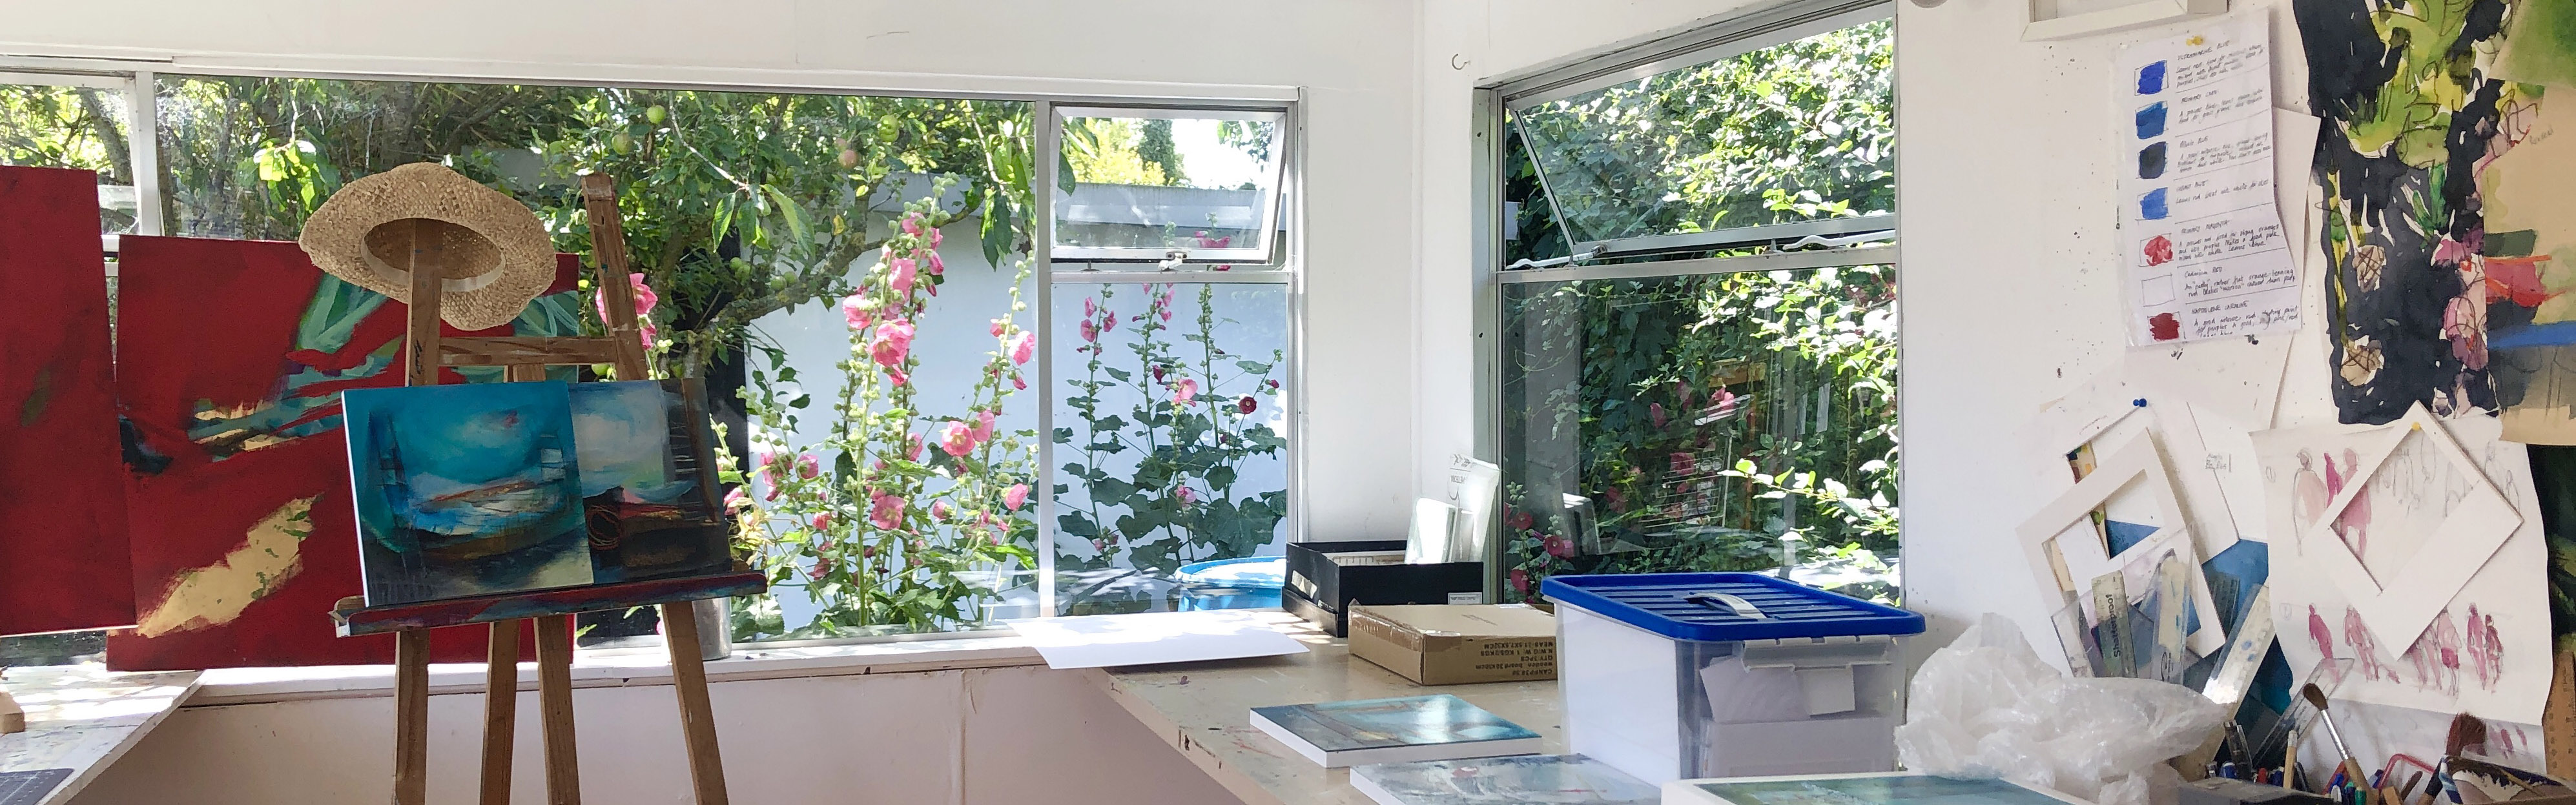 An image of an easel next to a window opening out onto a garden full of pink flowers